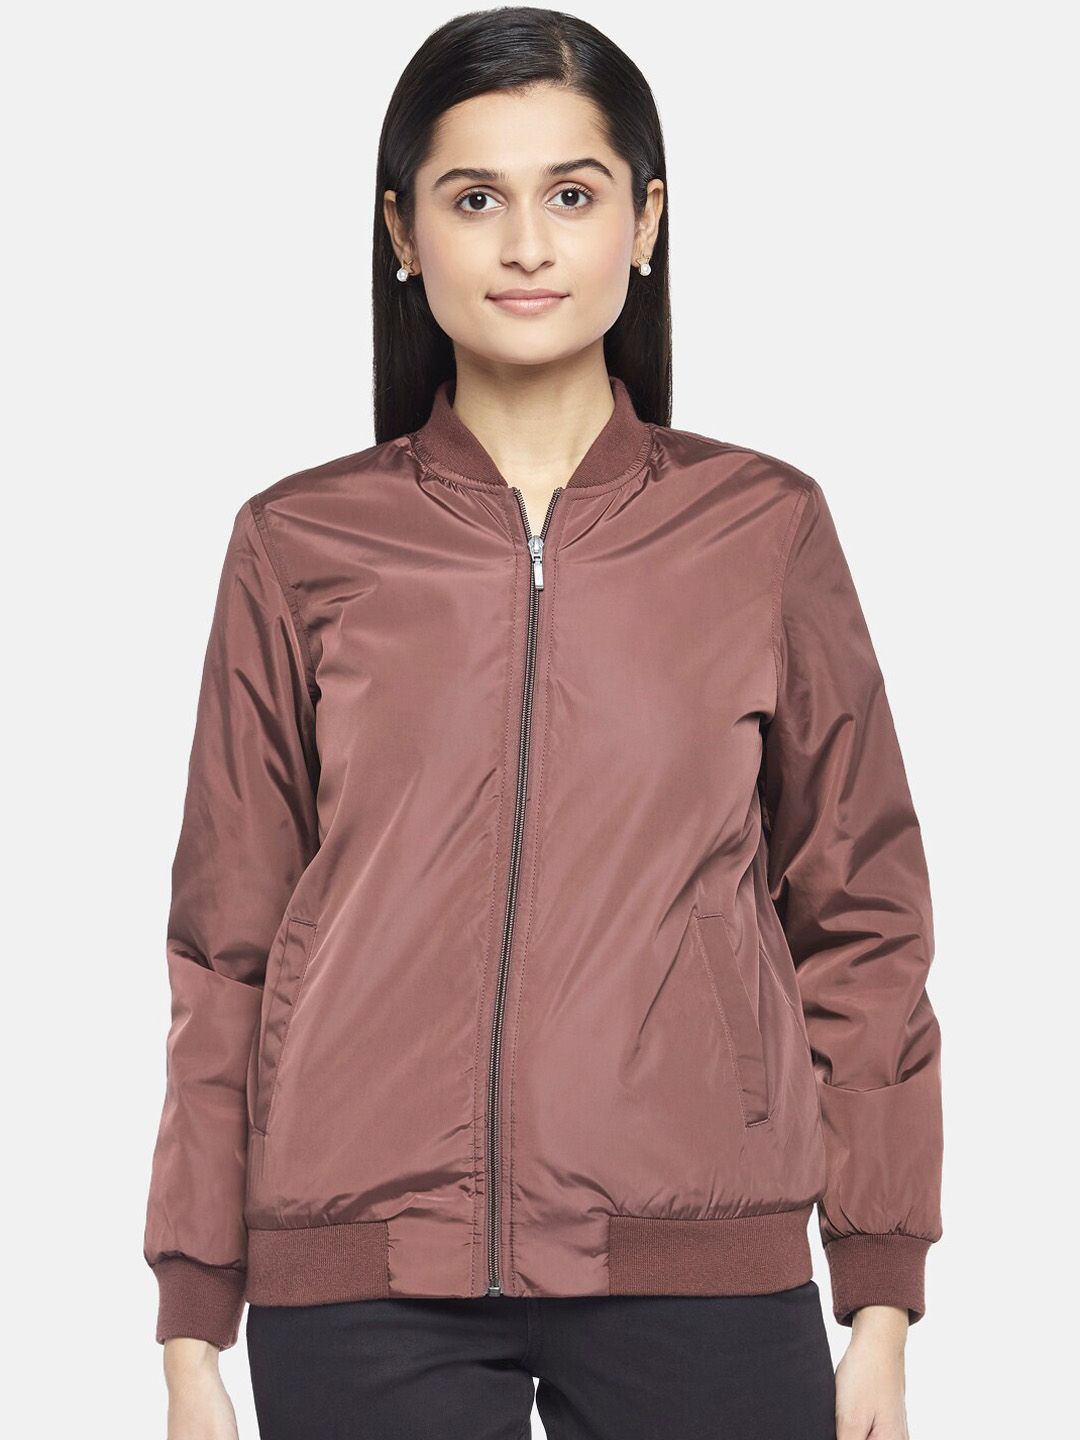 Honey by Pantaloons Women Red Bomber Jacket Price in India